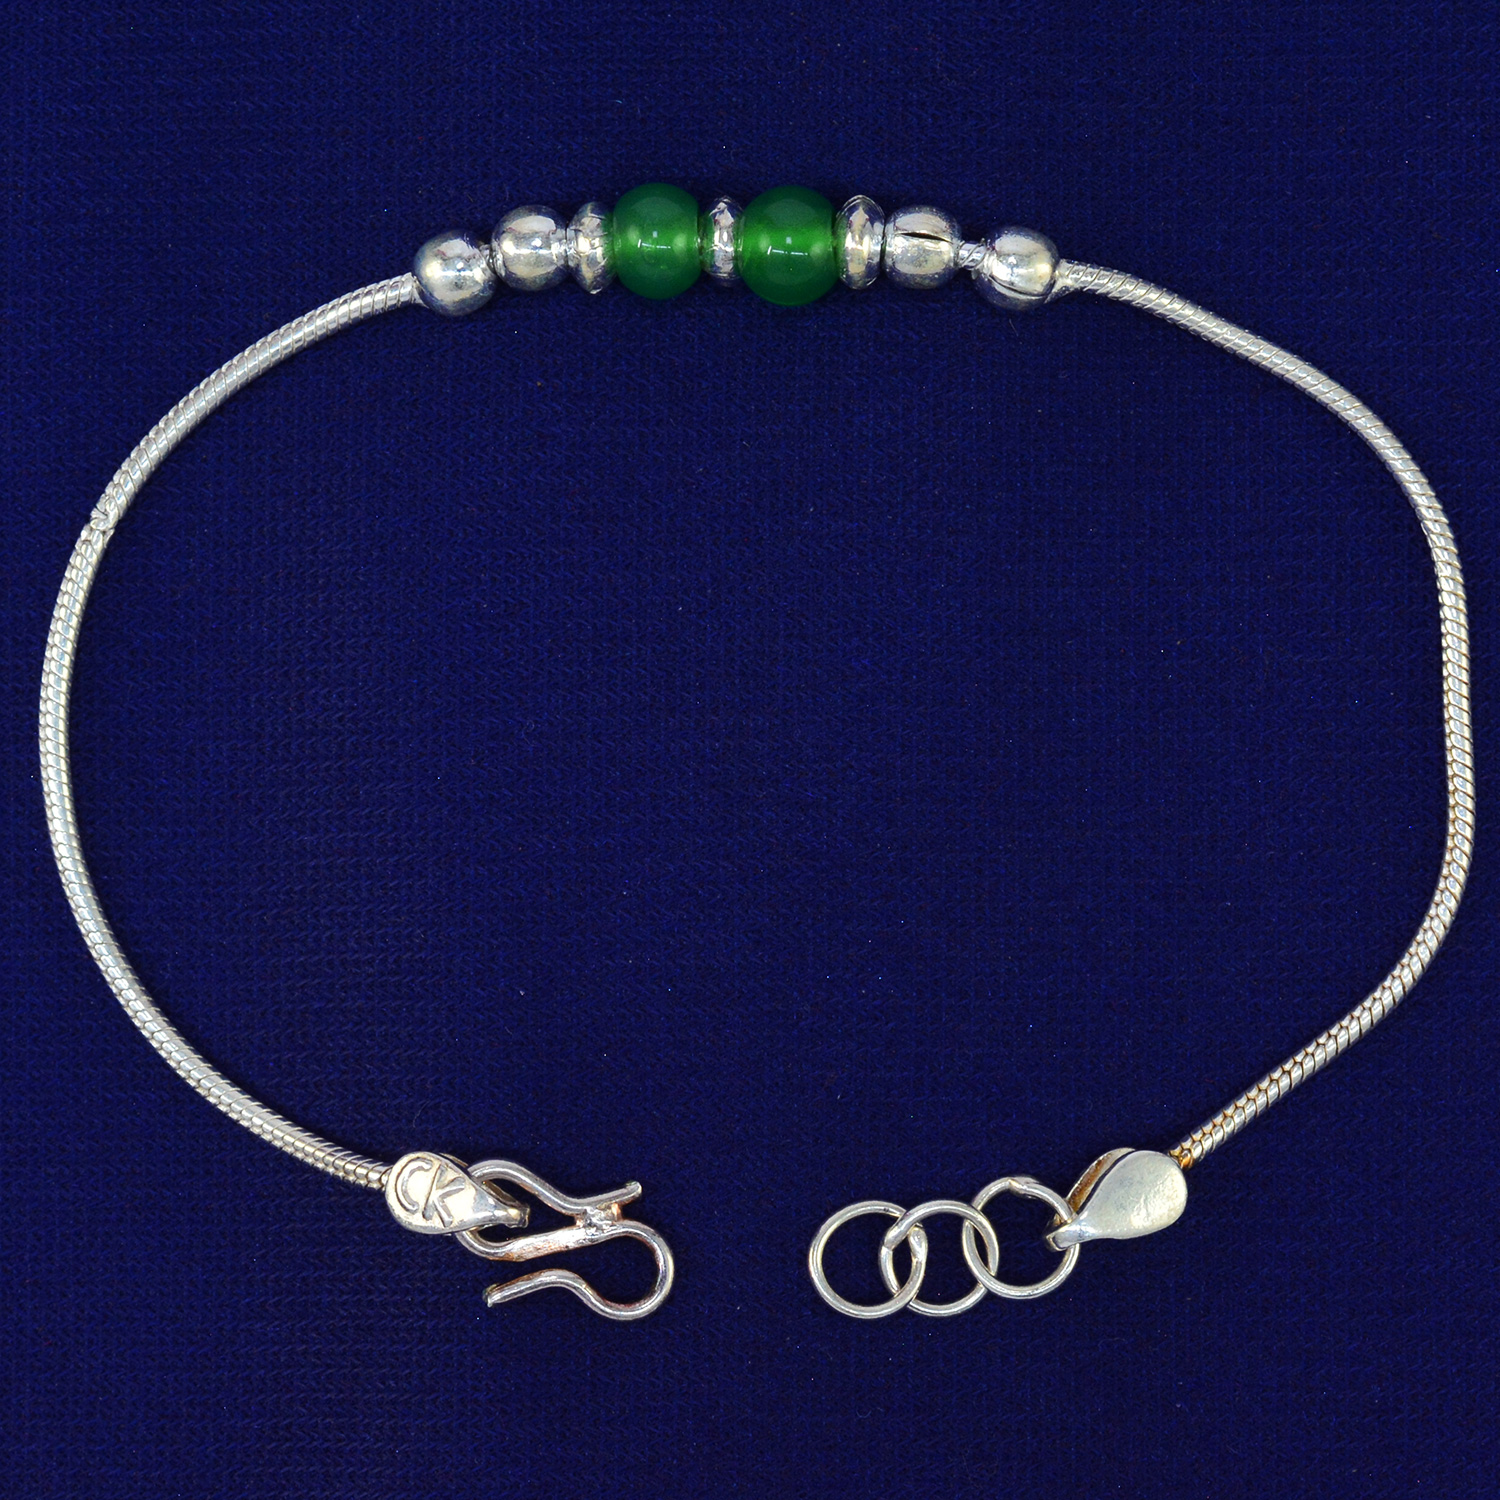 Magnificent Looking Pure Silver Chain Amazing Simple Design Rakhi - 6.5 Grams